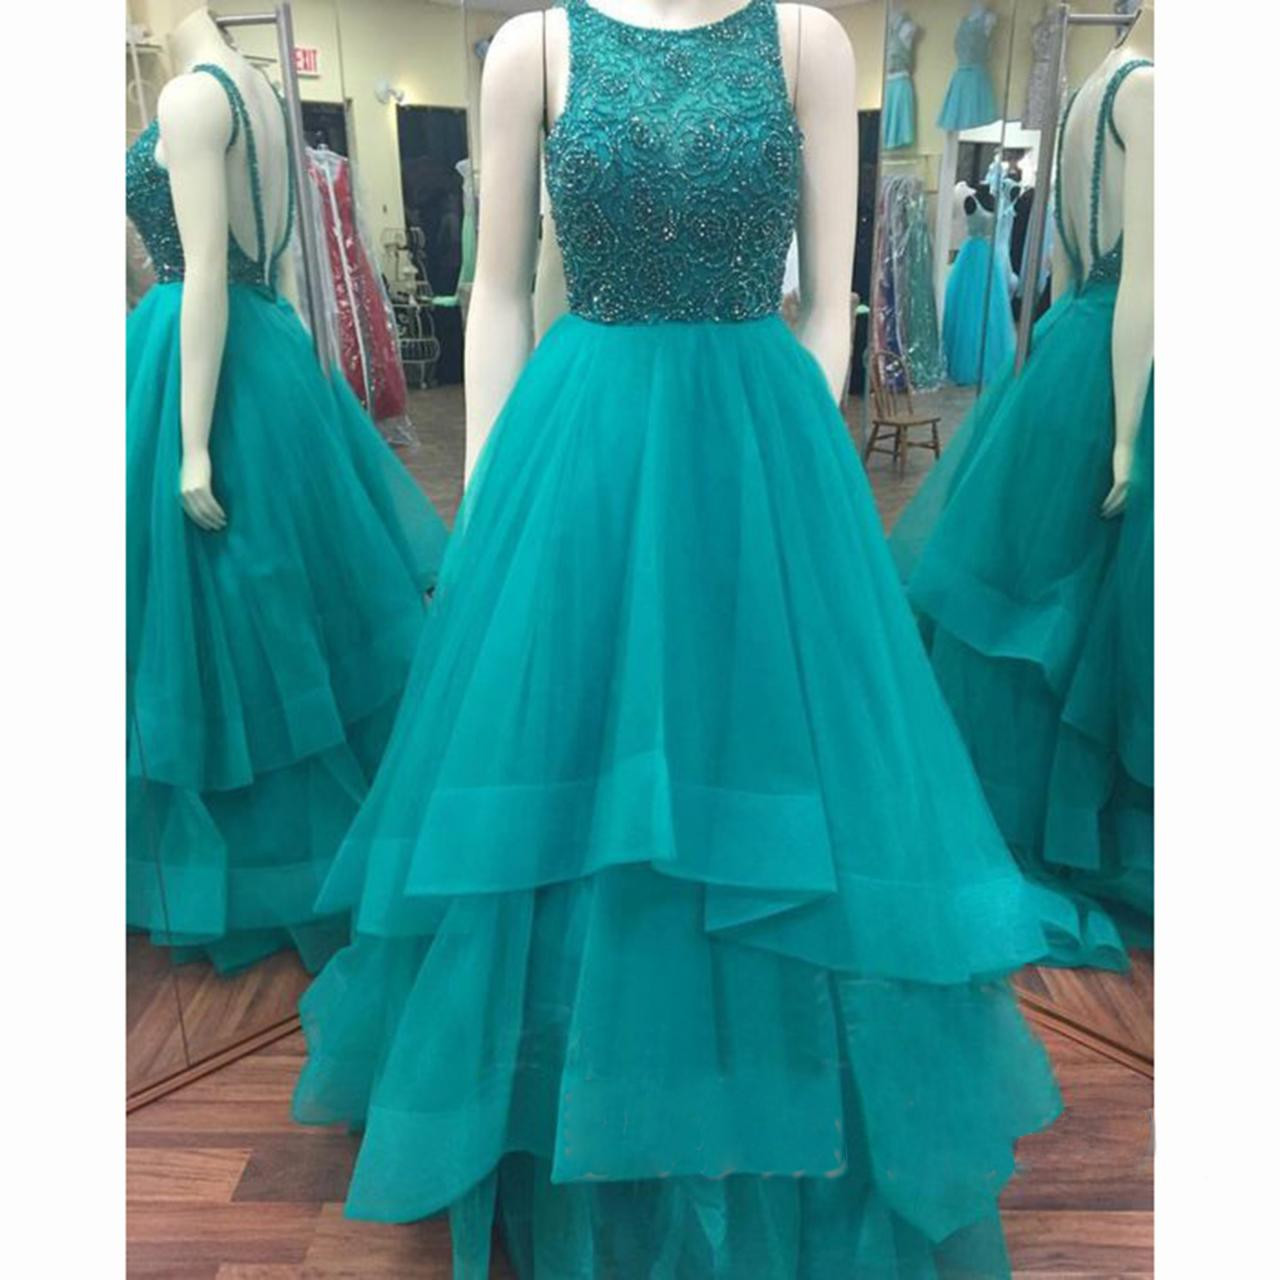 Fashion Prom Dress Evening Party Gown,party Dress,graduation Dress,wedding Guest Prom Gowns, Formal Occasion Dresses,formal Dress